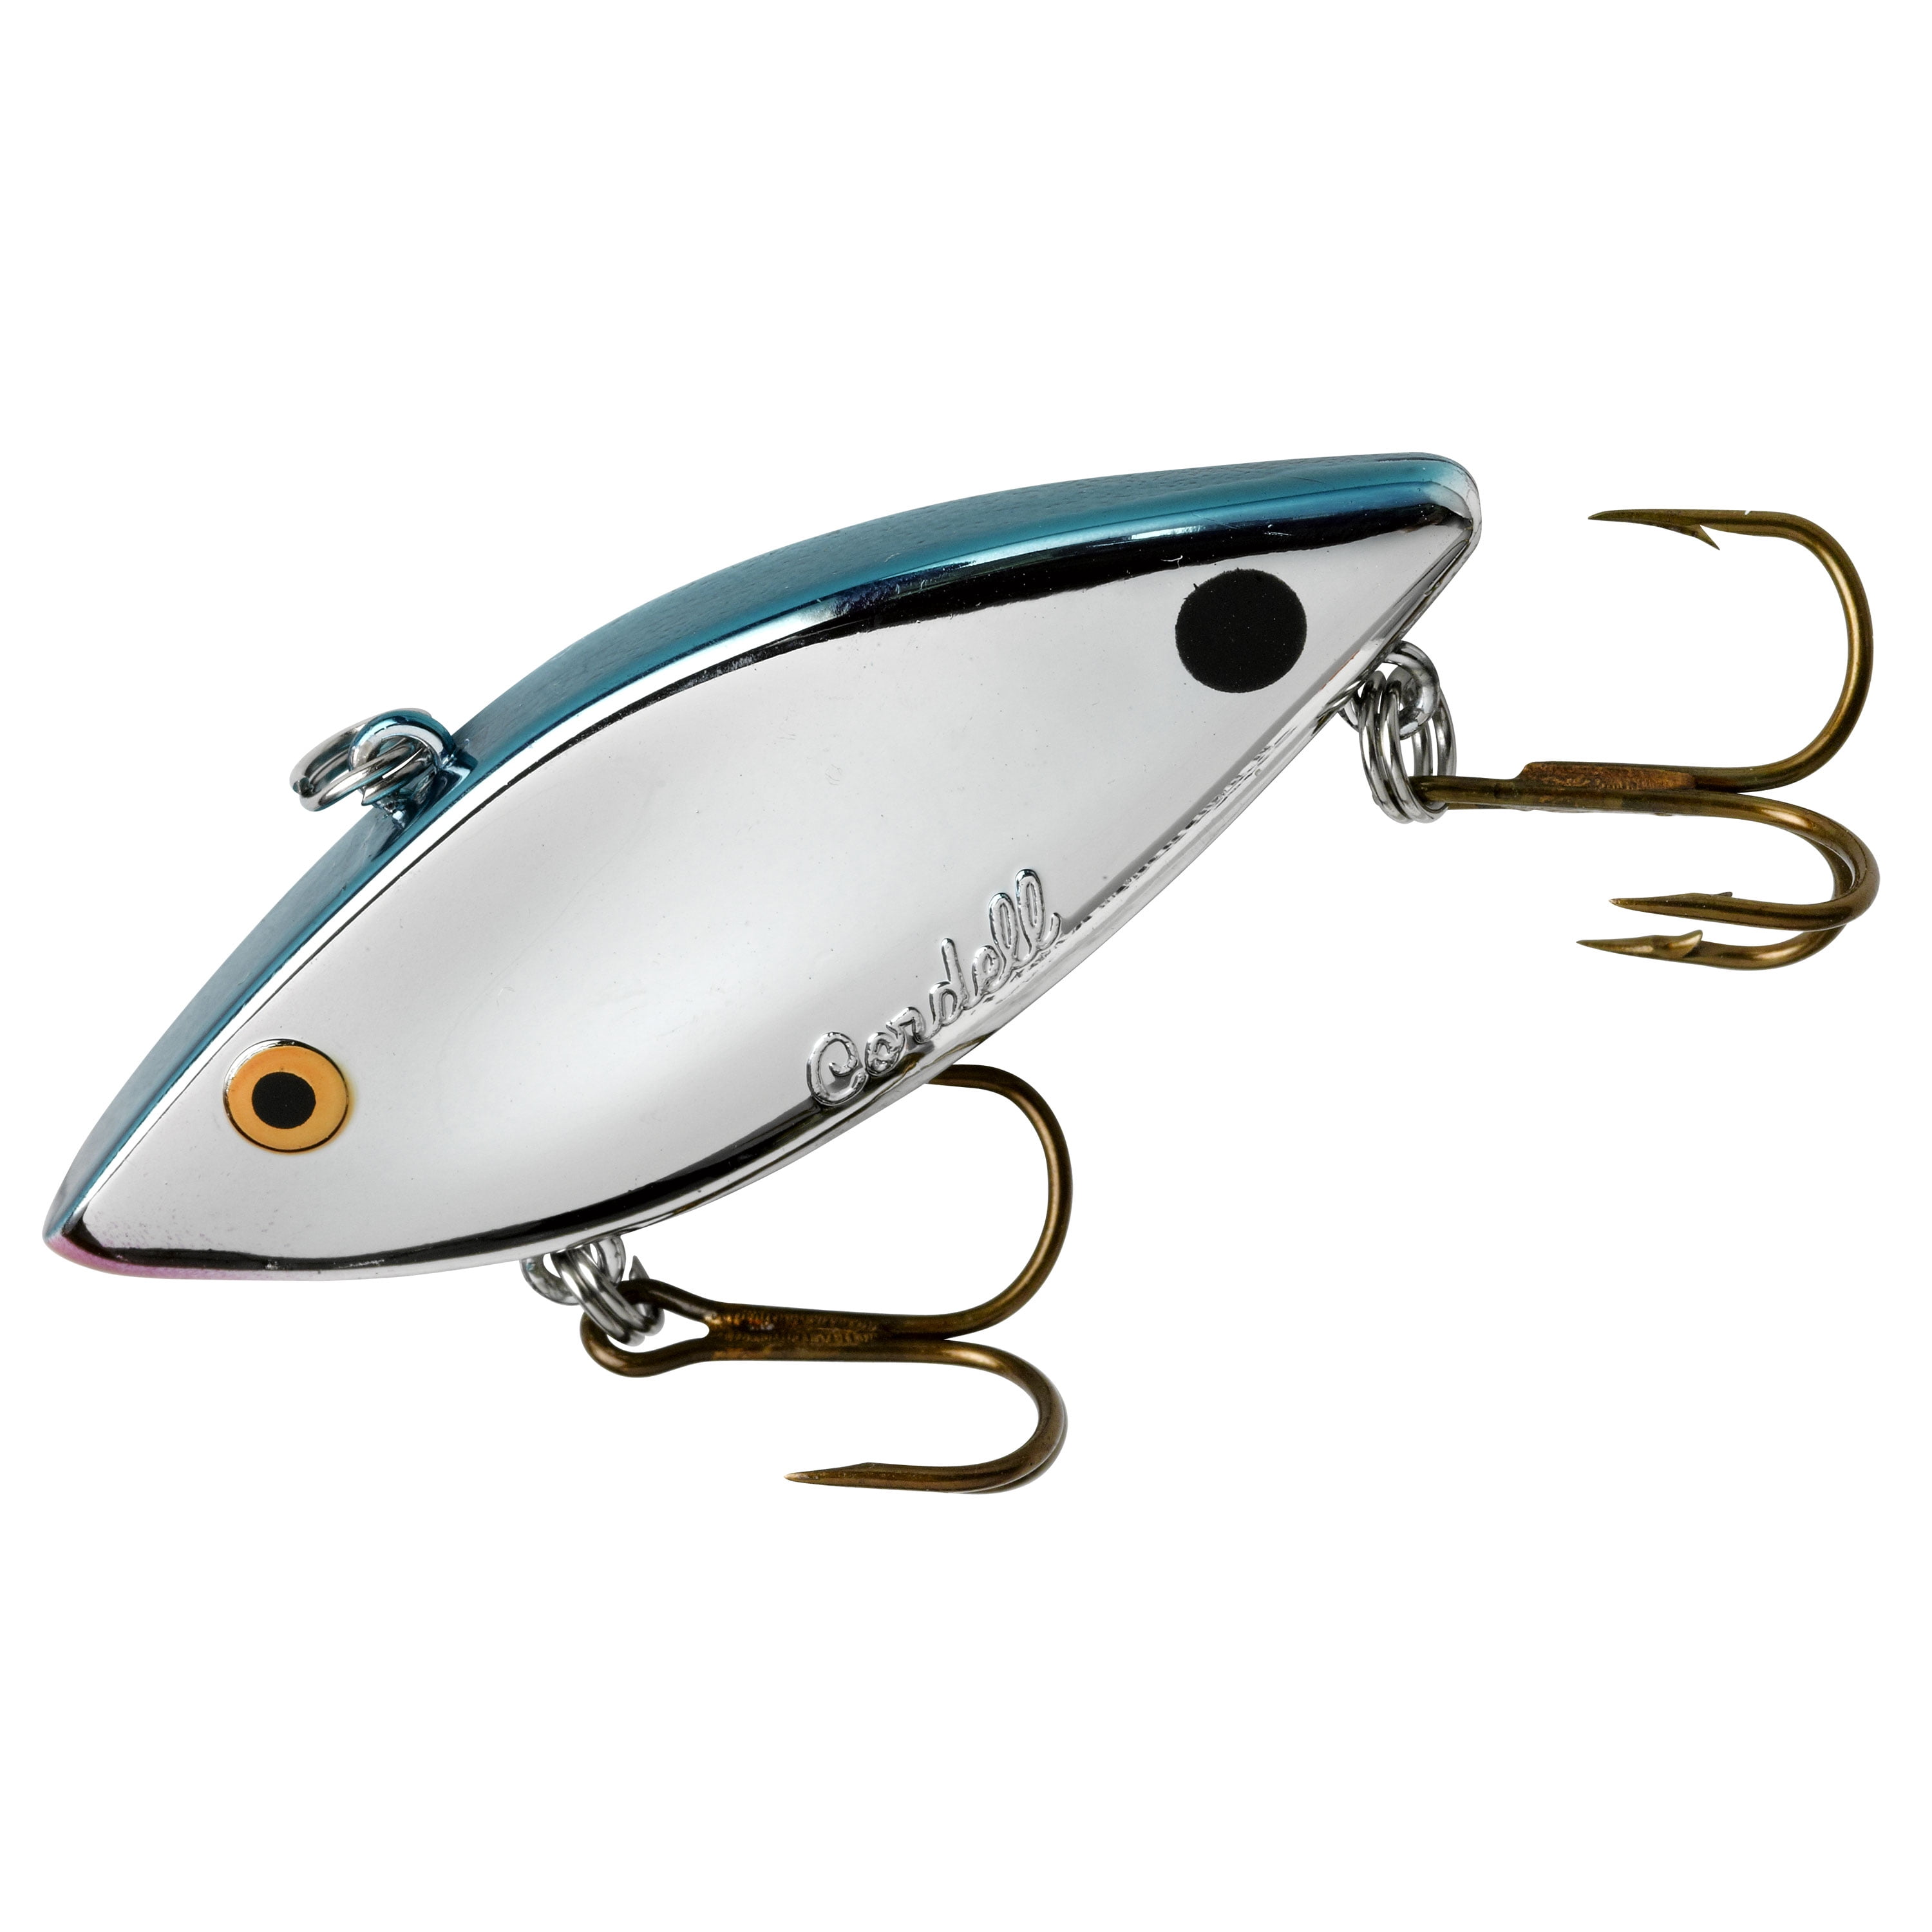 COTTON CORDELL BLUE STRIPER Fishing Lure • RAINBOW TROUT – Toad Tackle